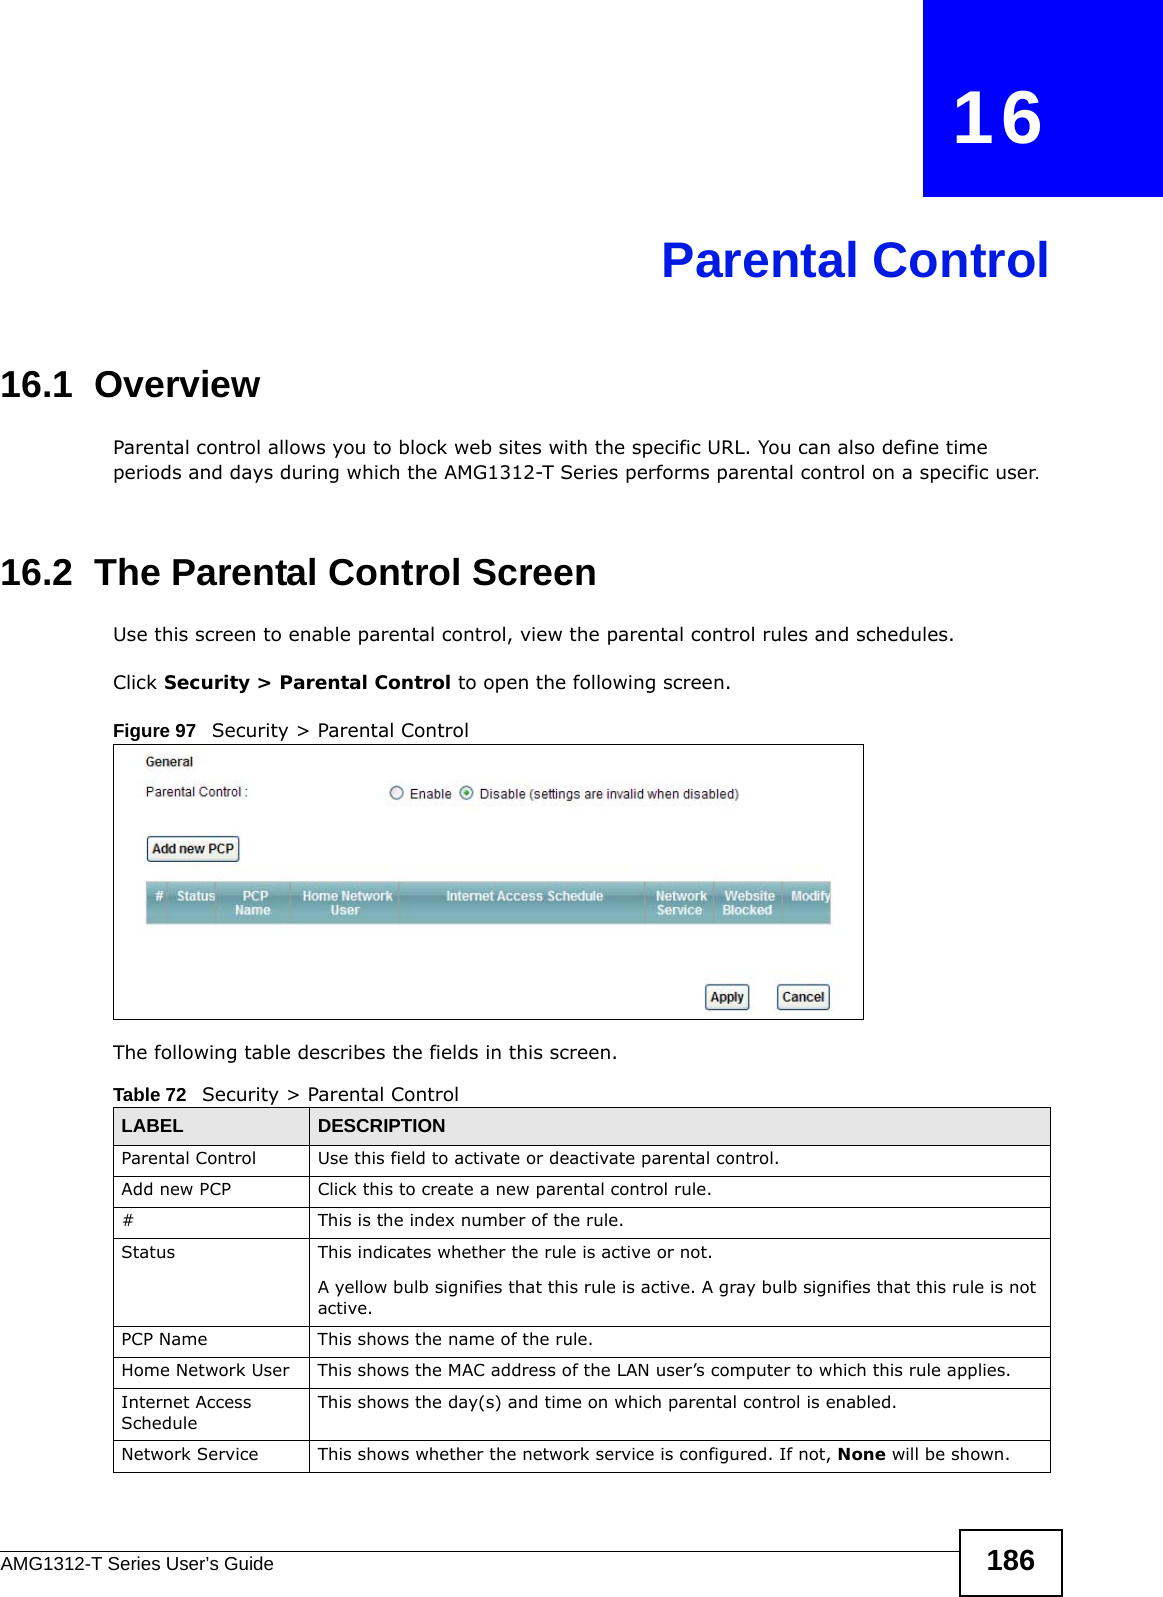 AMG1312-T Series User’s Guide 186CHAPTER   16Parental Control16.1  OverviewParental control allows you to block web sites with the specific URL. You can also define time periods and days during which the AMG1312-T Series performs parental control on a specific user.16.2  The Parental Control ScreenUse this screen to enable parental control, view the parental control rules and schedules.Click Security &gt; Parental Control to open the following screen. Figure 97   Security &gt; Parental Control  The following table describes the fields in this screen. Table 72   Security &gt; Parental ControlLABEL DESCRIPTIONParental Control Use this field to activate or deactivate parental control.Add new PCP Click this to create a new parental control rule.# This is the index number of the rule.Status This indicates whether the rule is active or not.A yellow bulb signifies that this rule is active. A gray bulb signifies that this rule is not active.PCP Name This shows the name of the rule.Home Network User This shows the MAC address of the LAN user’s computer to which this rule applies.Internet Access ScheduleThis shows the day(s) and time on which parental control is enabled.Network Service This shows whether the network service is configured. If not, None will be shown.